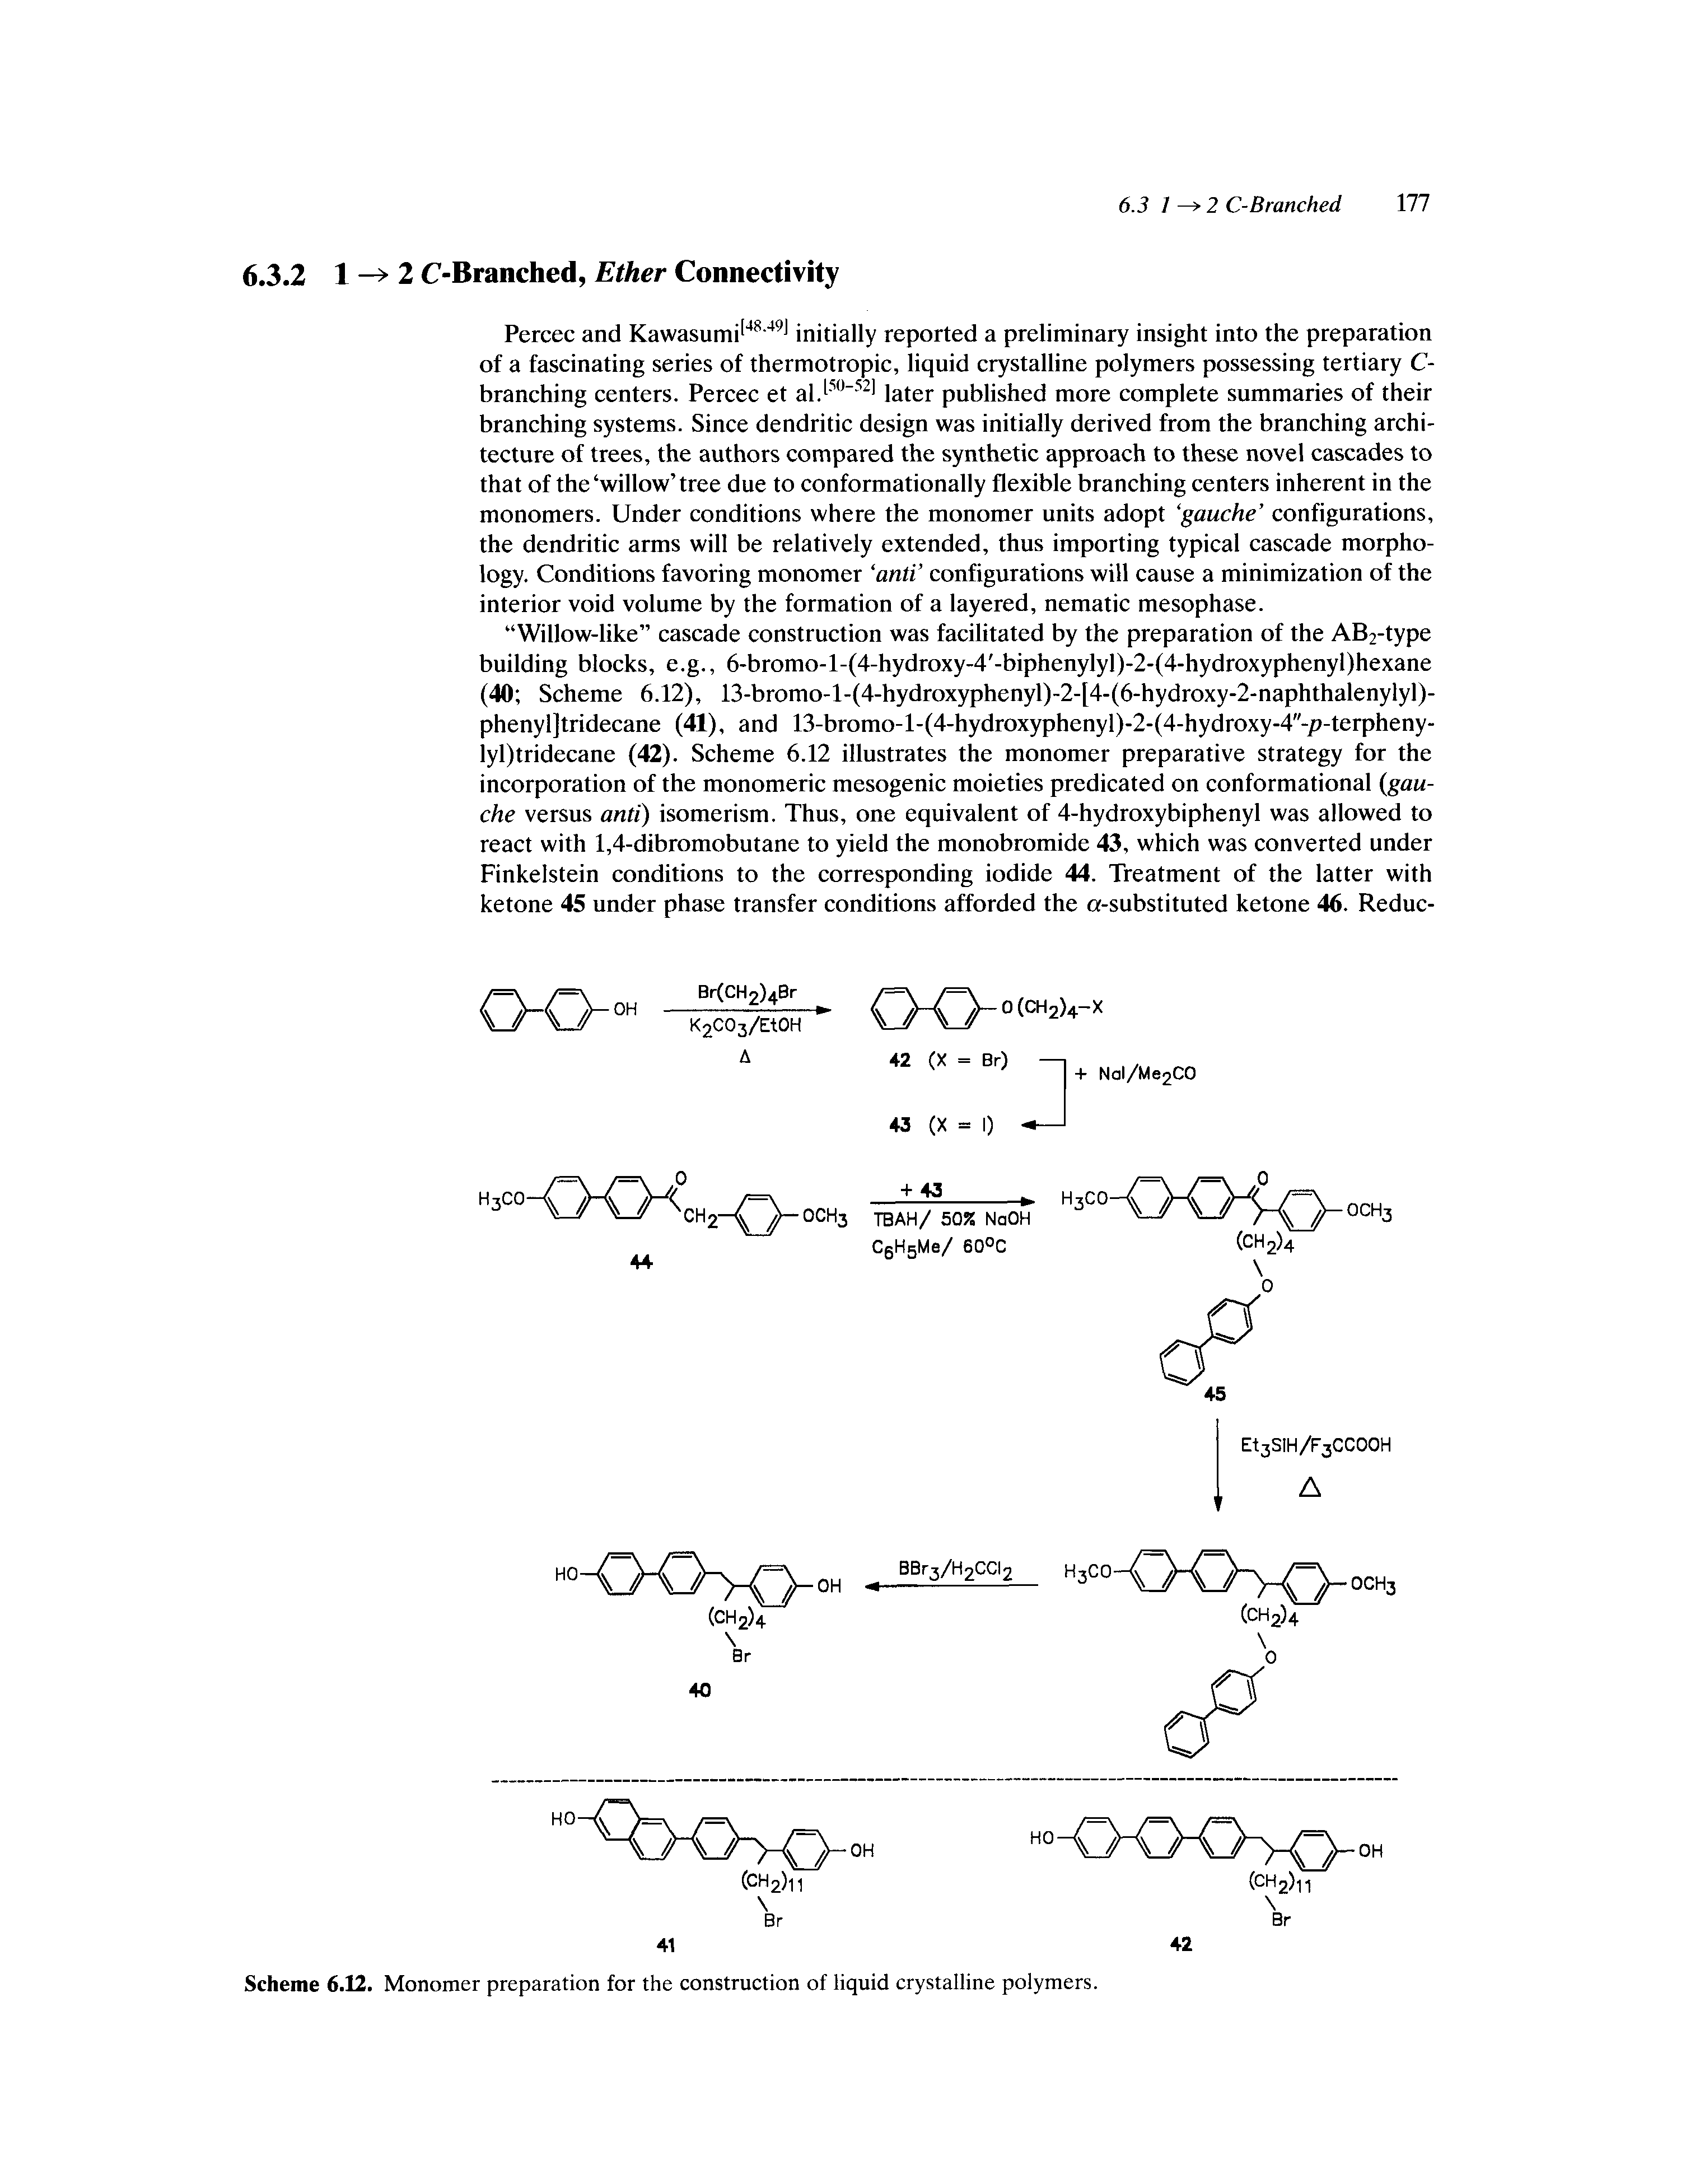 Scheme 6.12. Monomer preparation for the construction of liquid crystalline polymers.